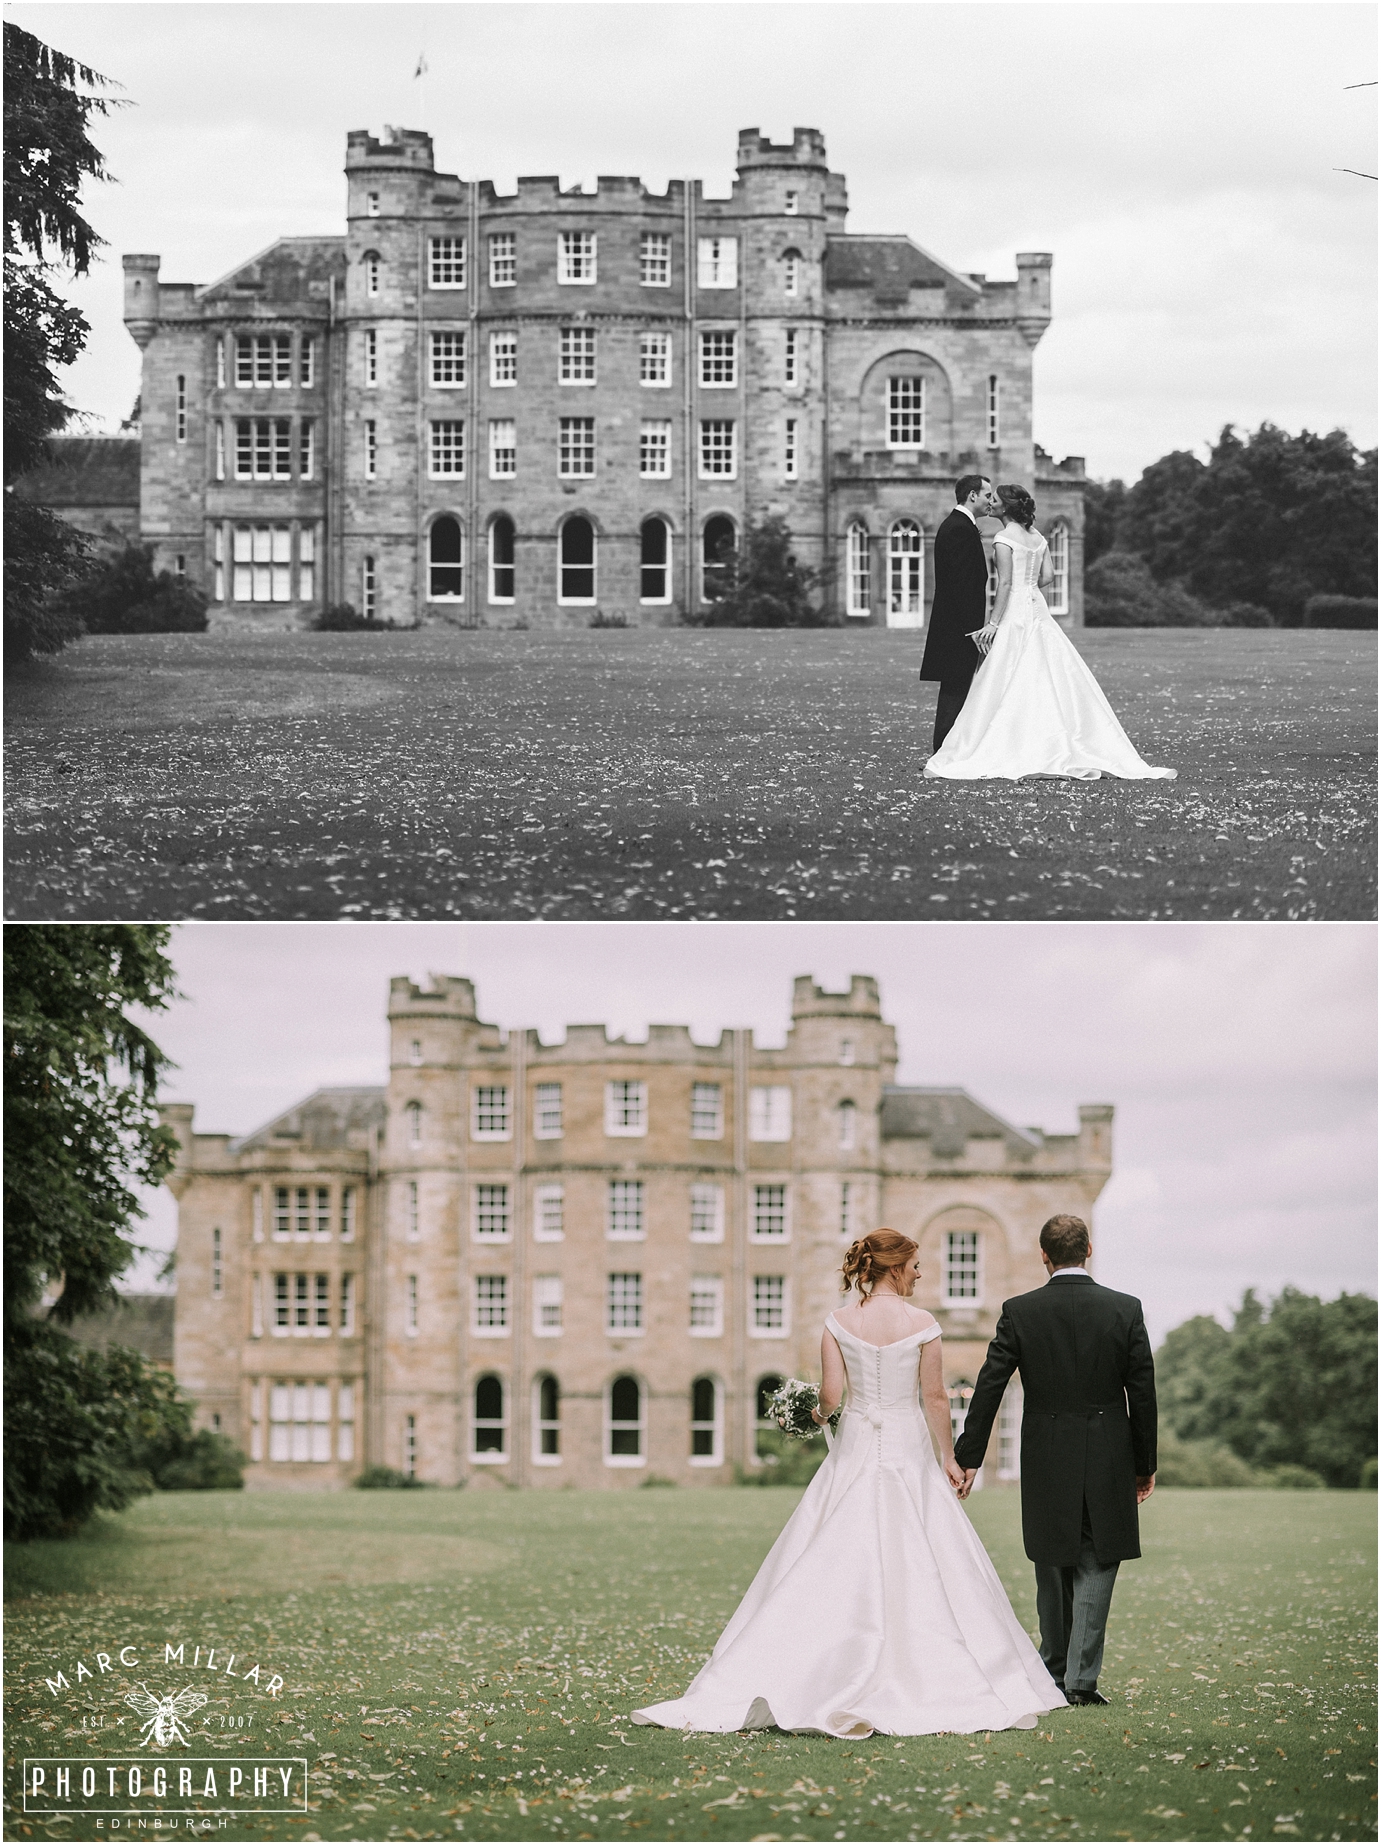  Oxenfoord Castle Wedding Photography by Marc Millar Photography 